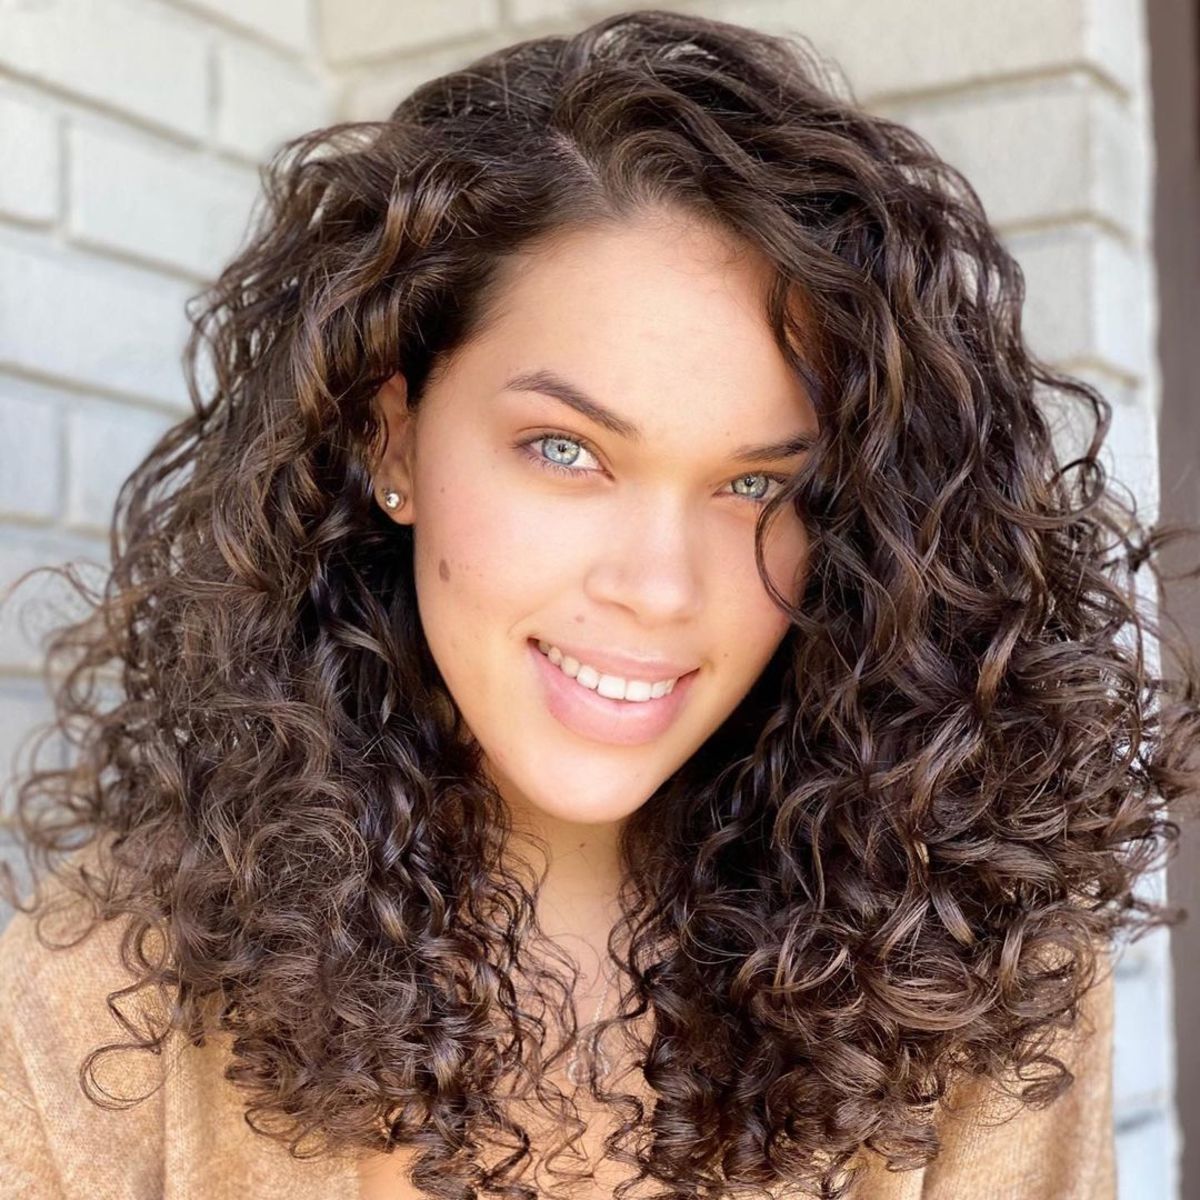 65 Best Shoulder Length Curly Hair Cuts & Styles in 2023